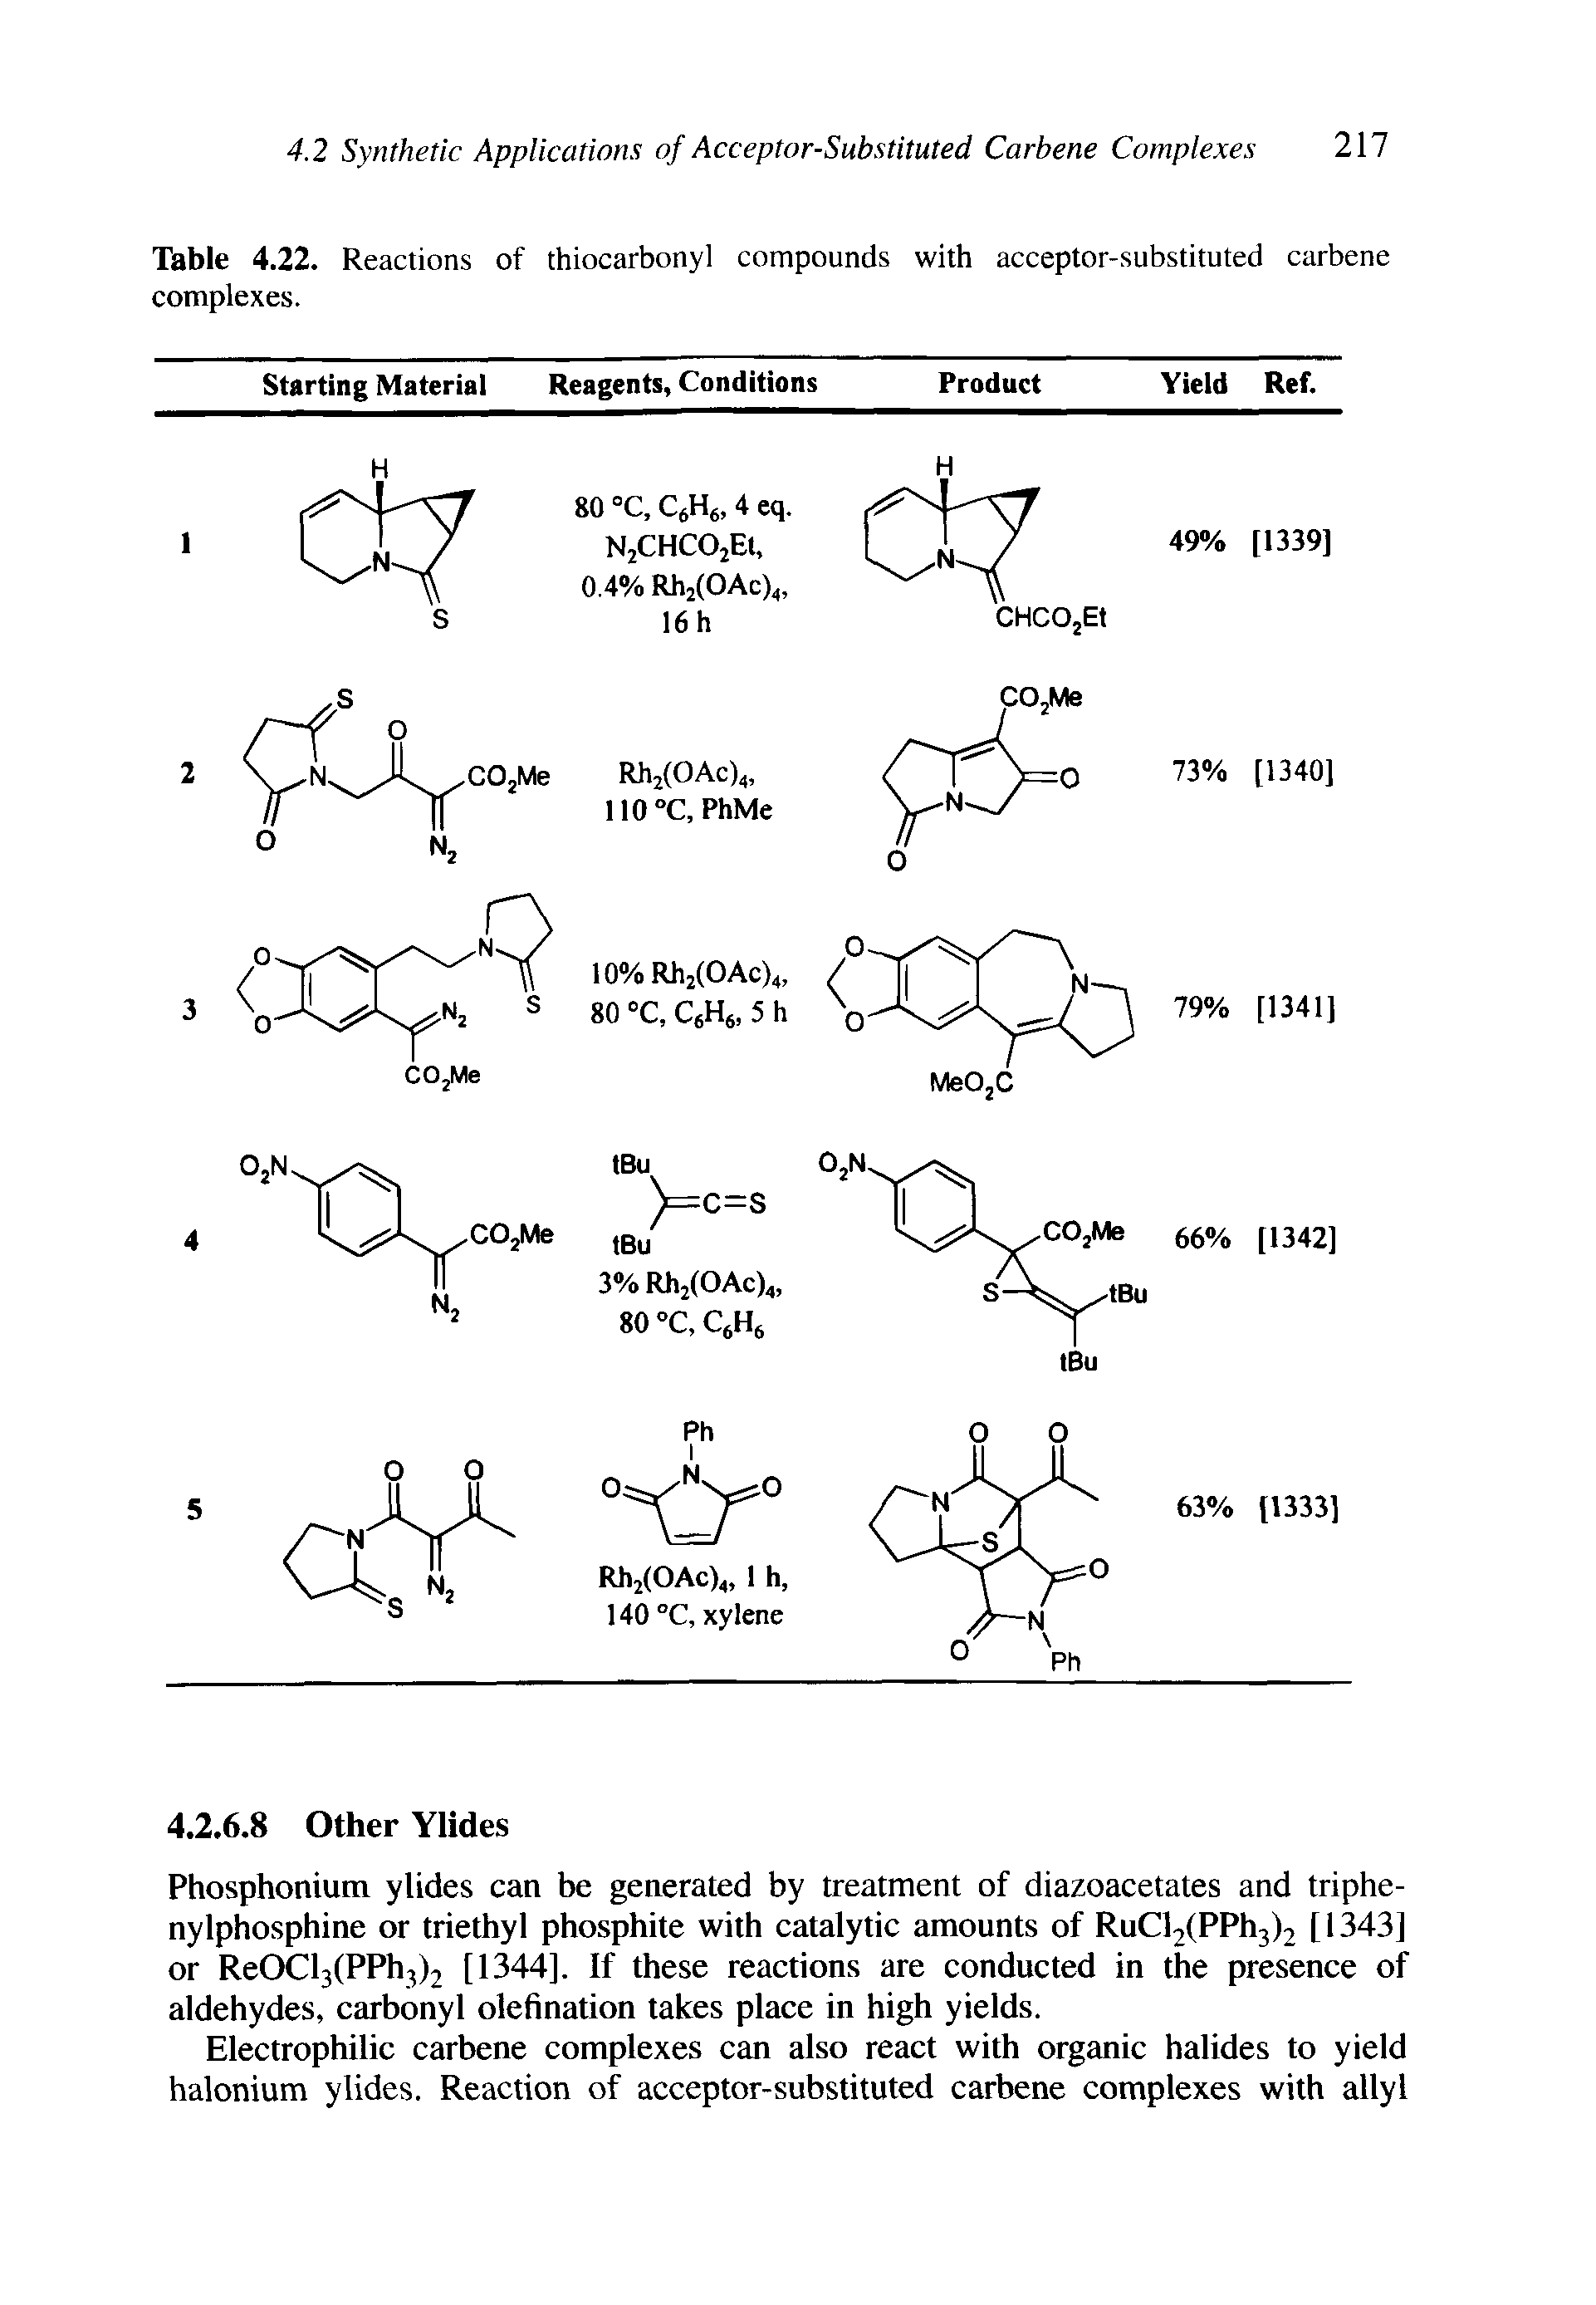 Table 4.22. Reactions of thiocarbonyl compounds with acceptor-substituted carbene complexes.